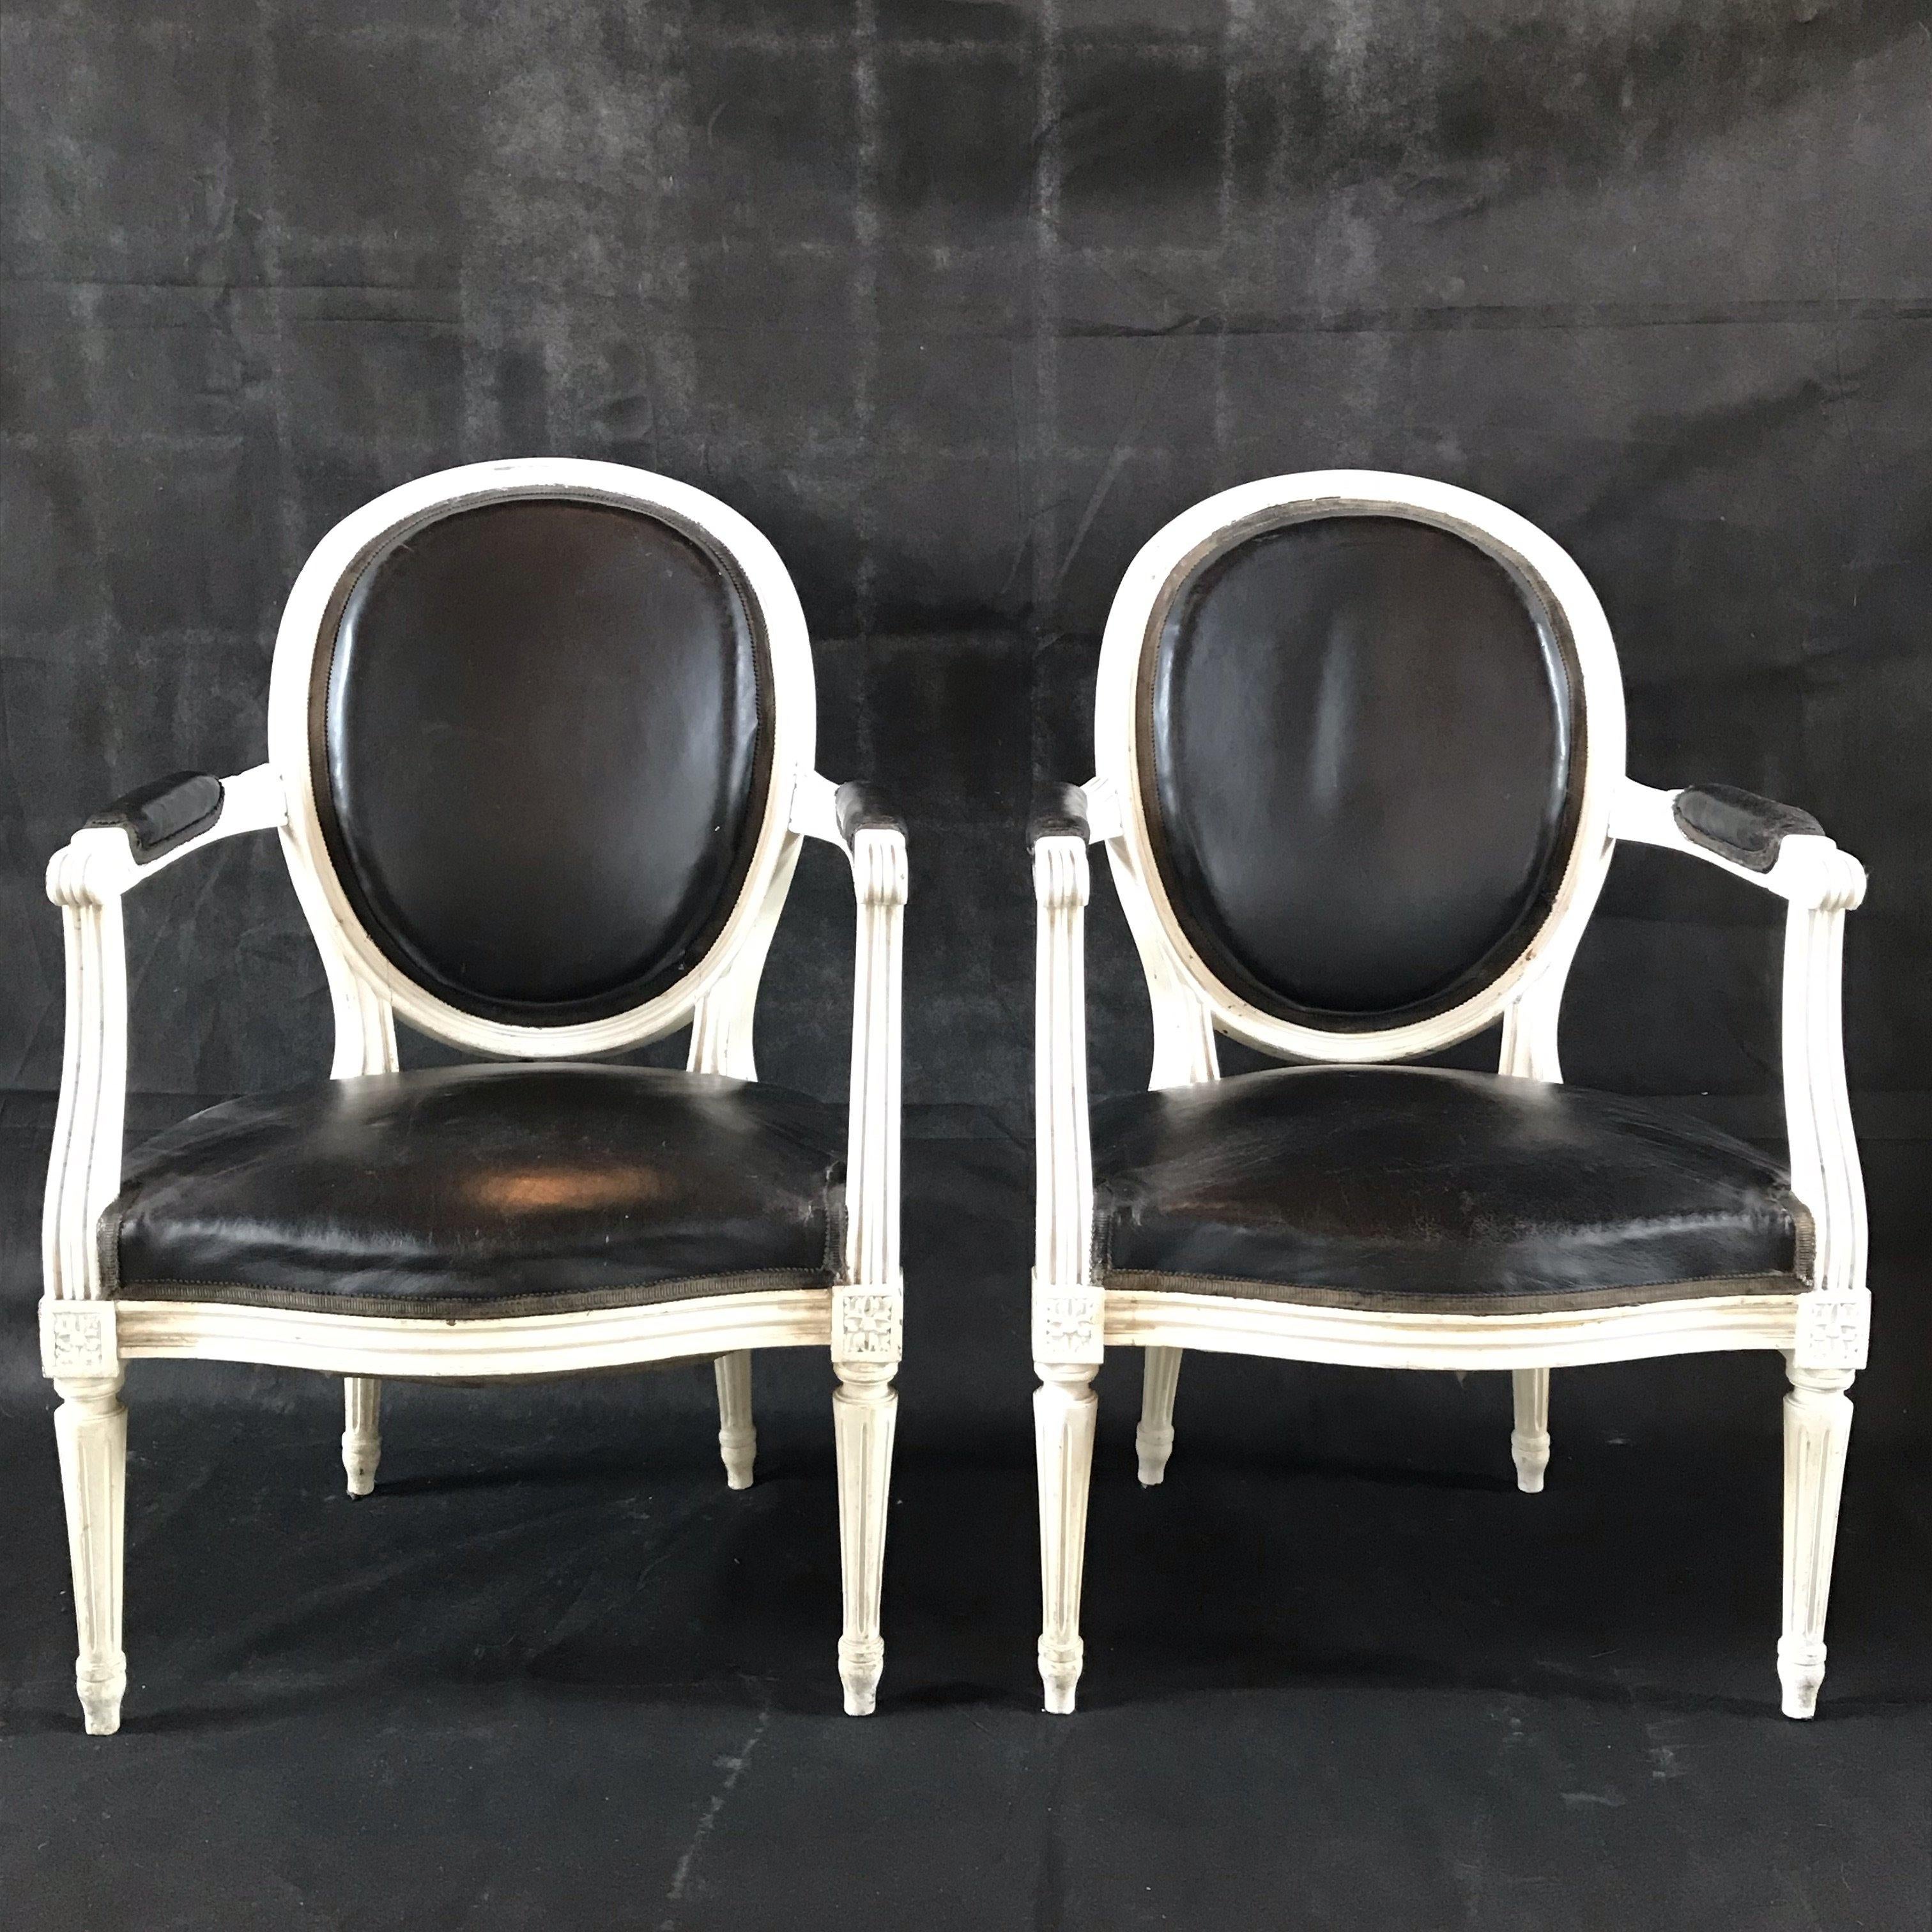 Pair of Louis XVI white fauteuils armchairs in original black leather and
white paint from the 19th century.  #5002
Dimensions:
34.25